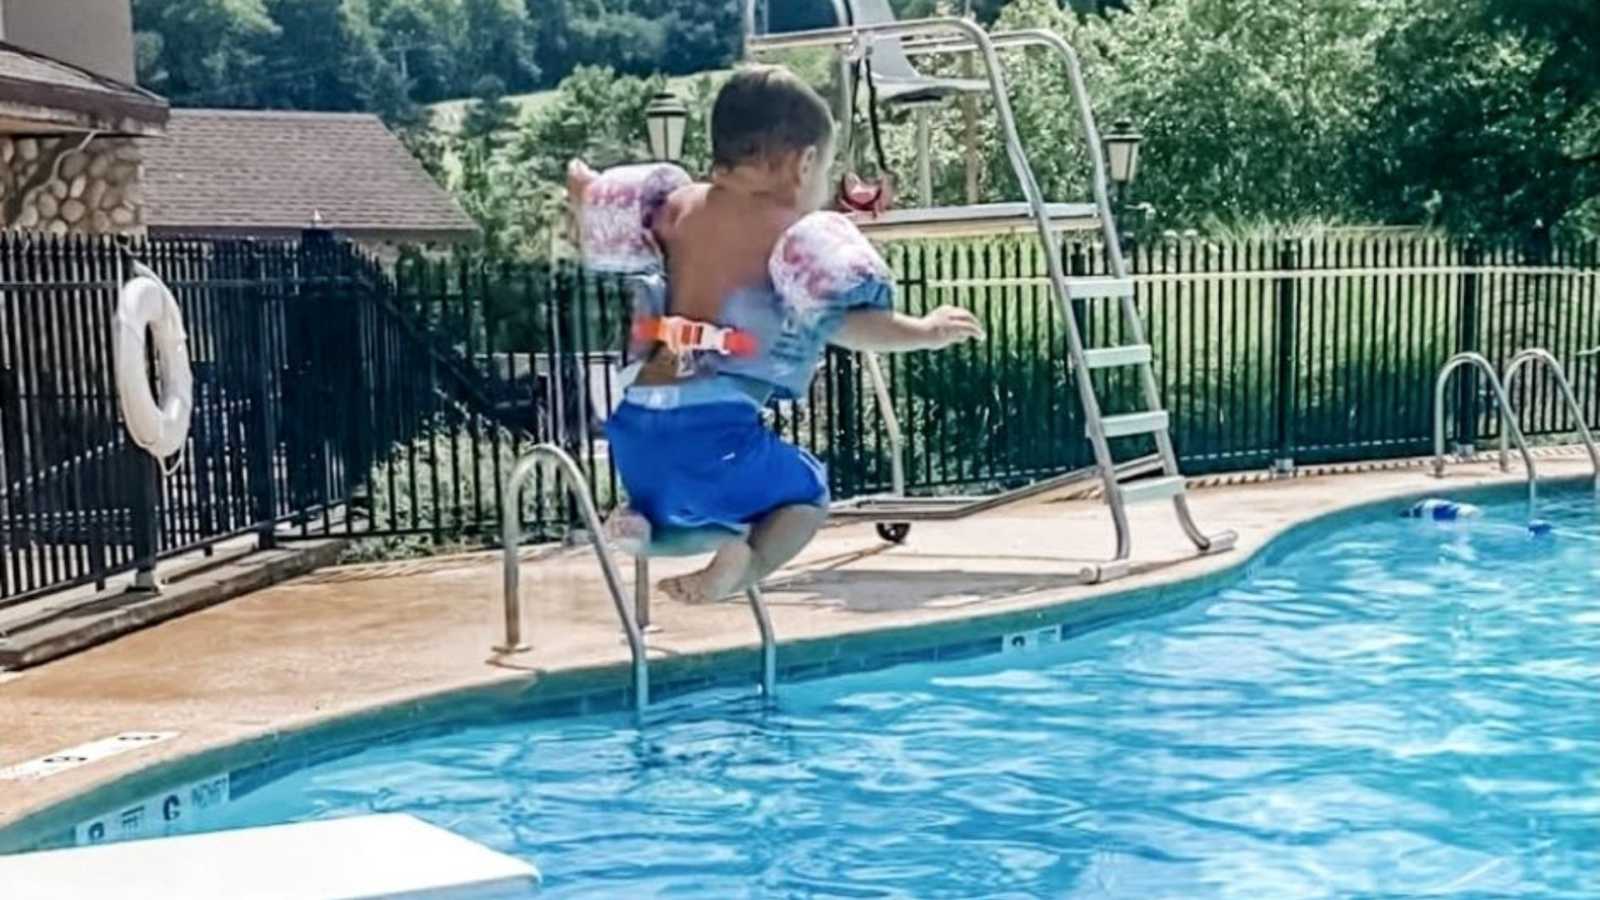 Mom snaps photo of adopted son jumping off the diving board at the local community pool